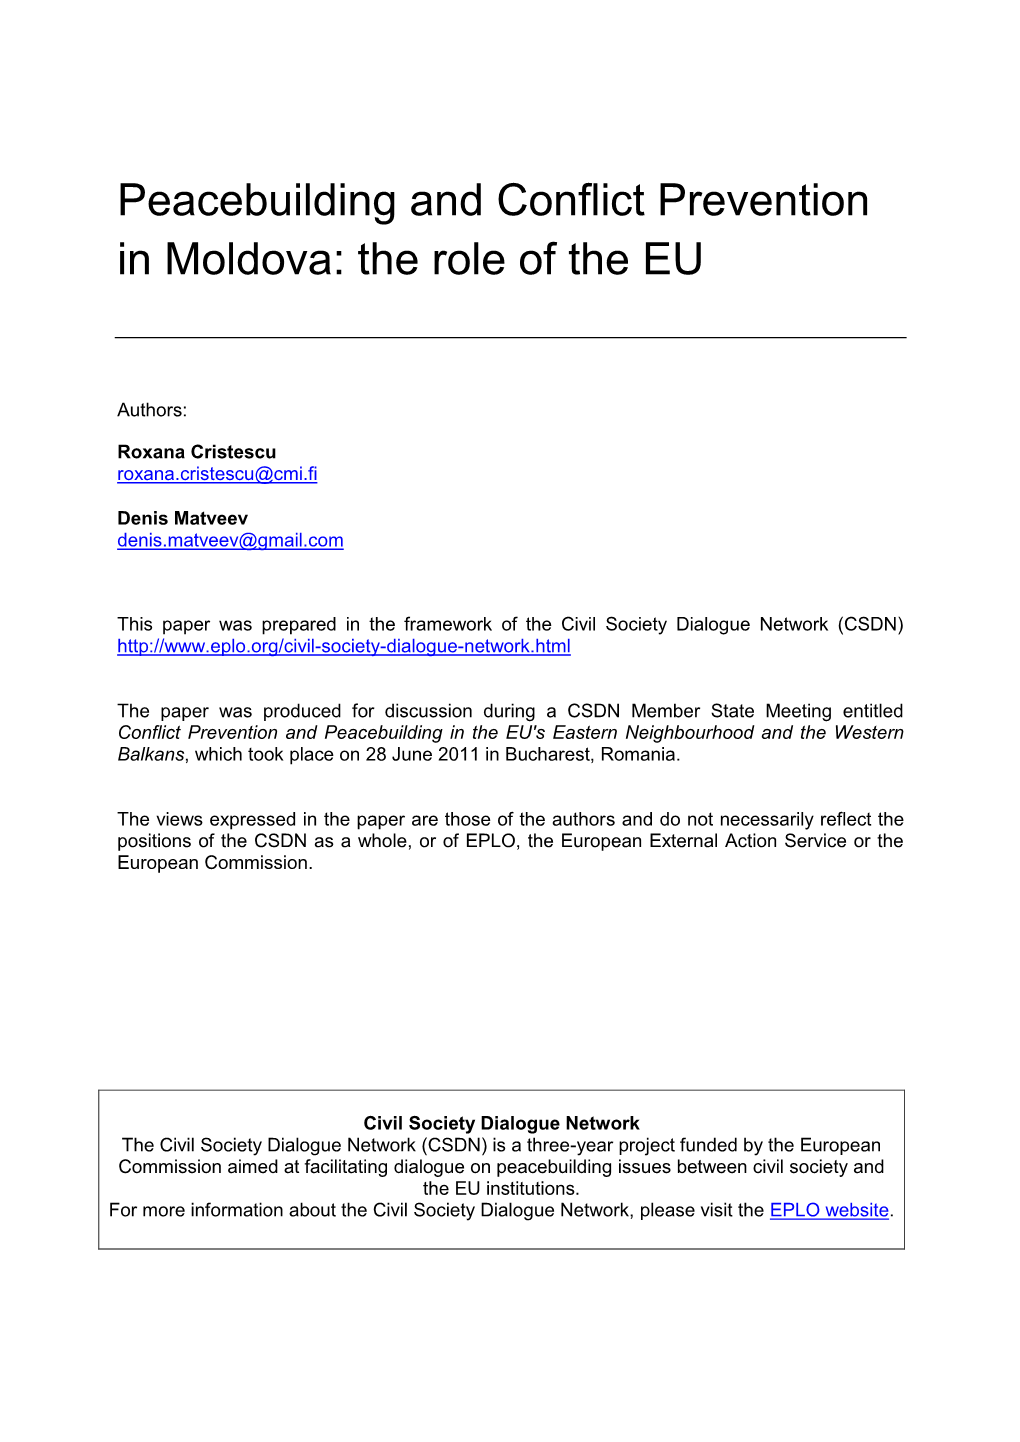 Peacebuilding and Conflict Prevention in Moldova: the Role of the EU